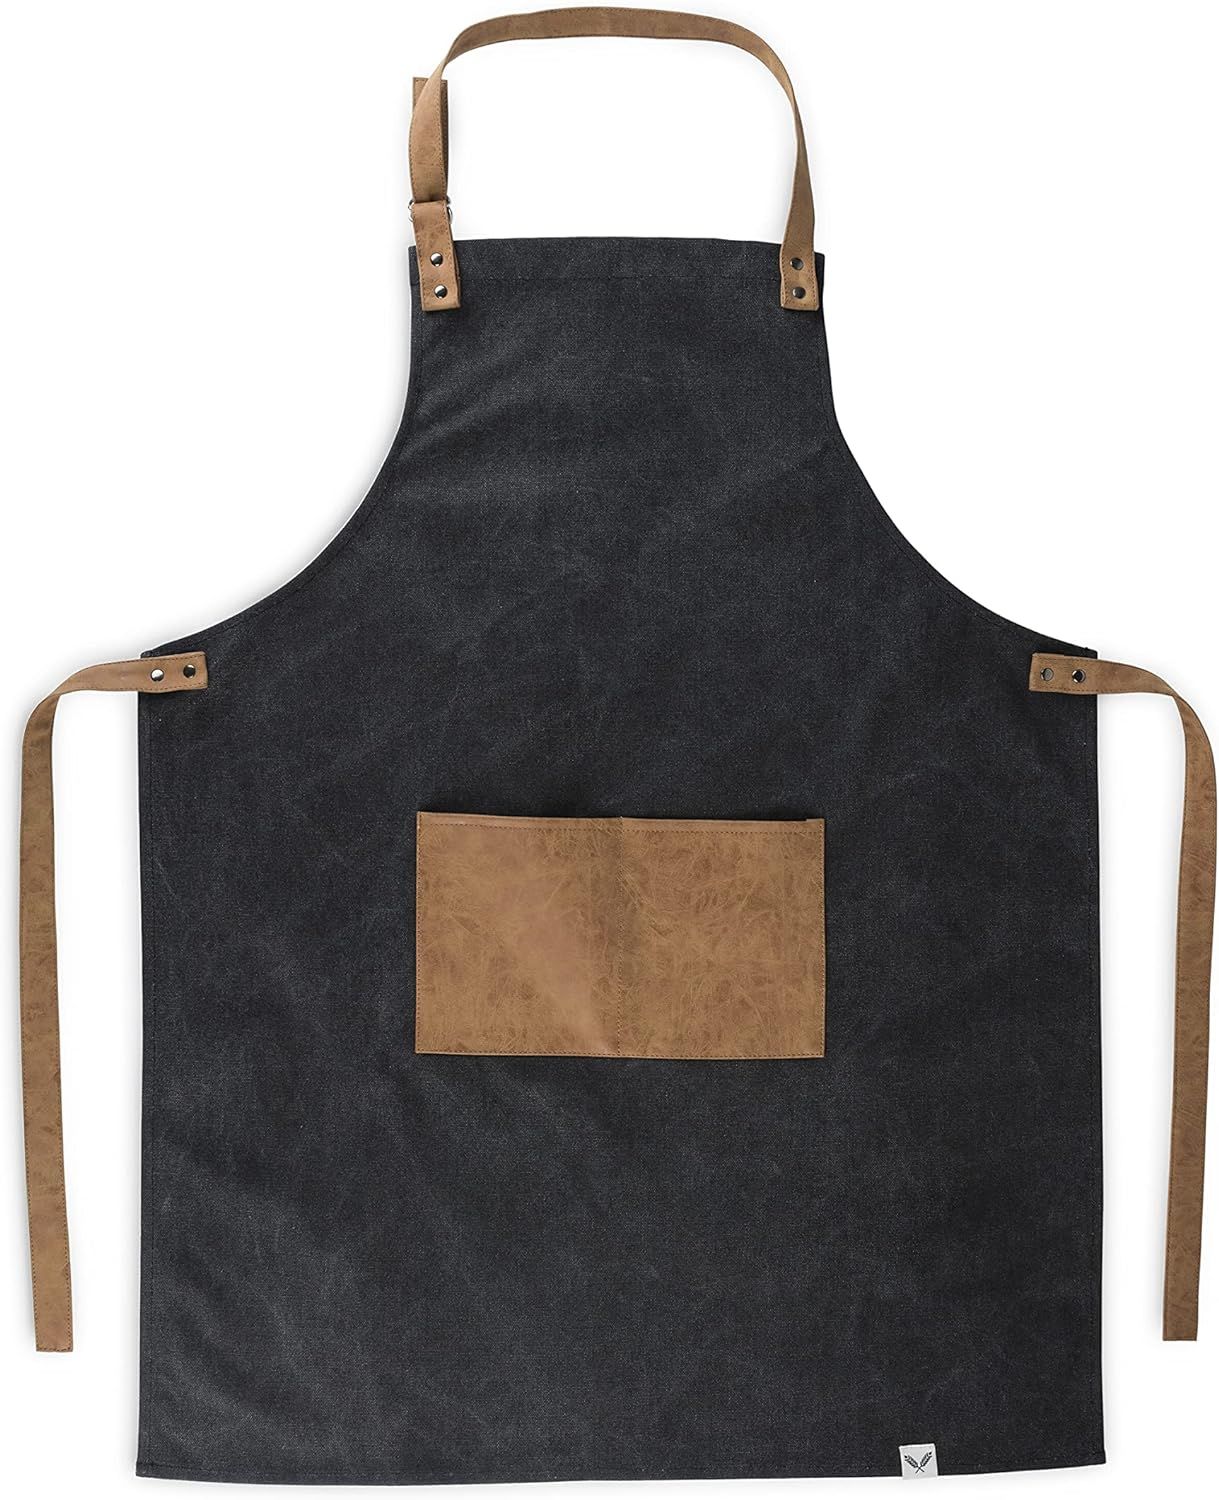 Foster & Rye Grilling Apron with Pocket, Canvas Apron for Men with Adjustable Strap, BBQ & Grill ... | Amazon (US)